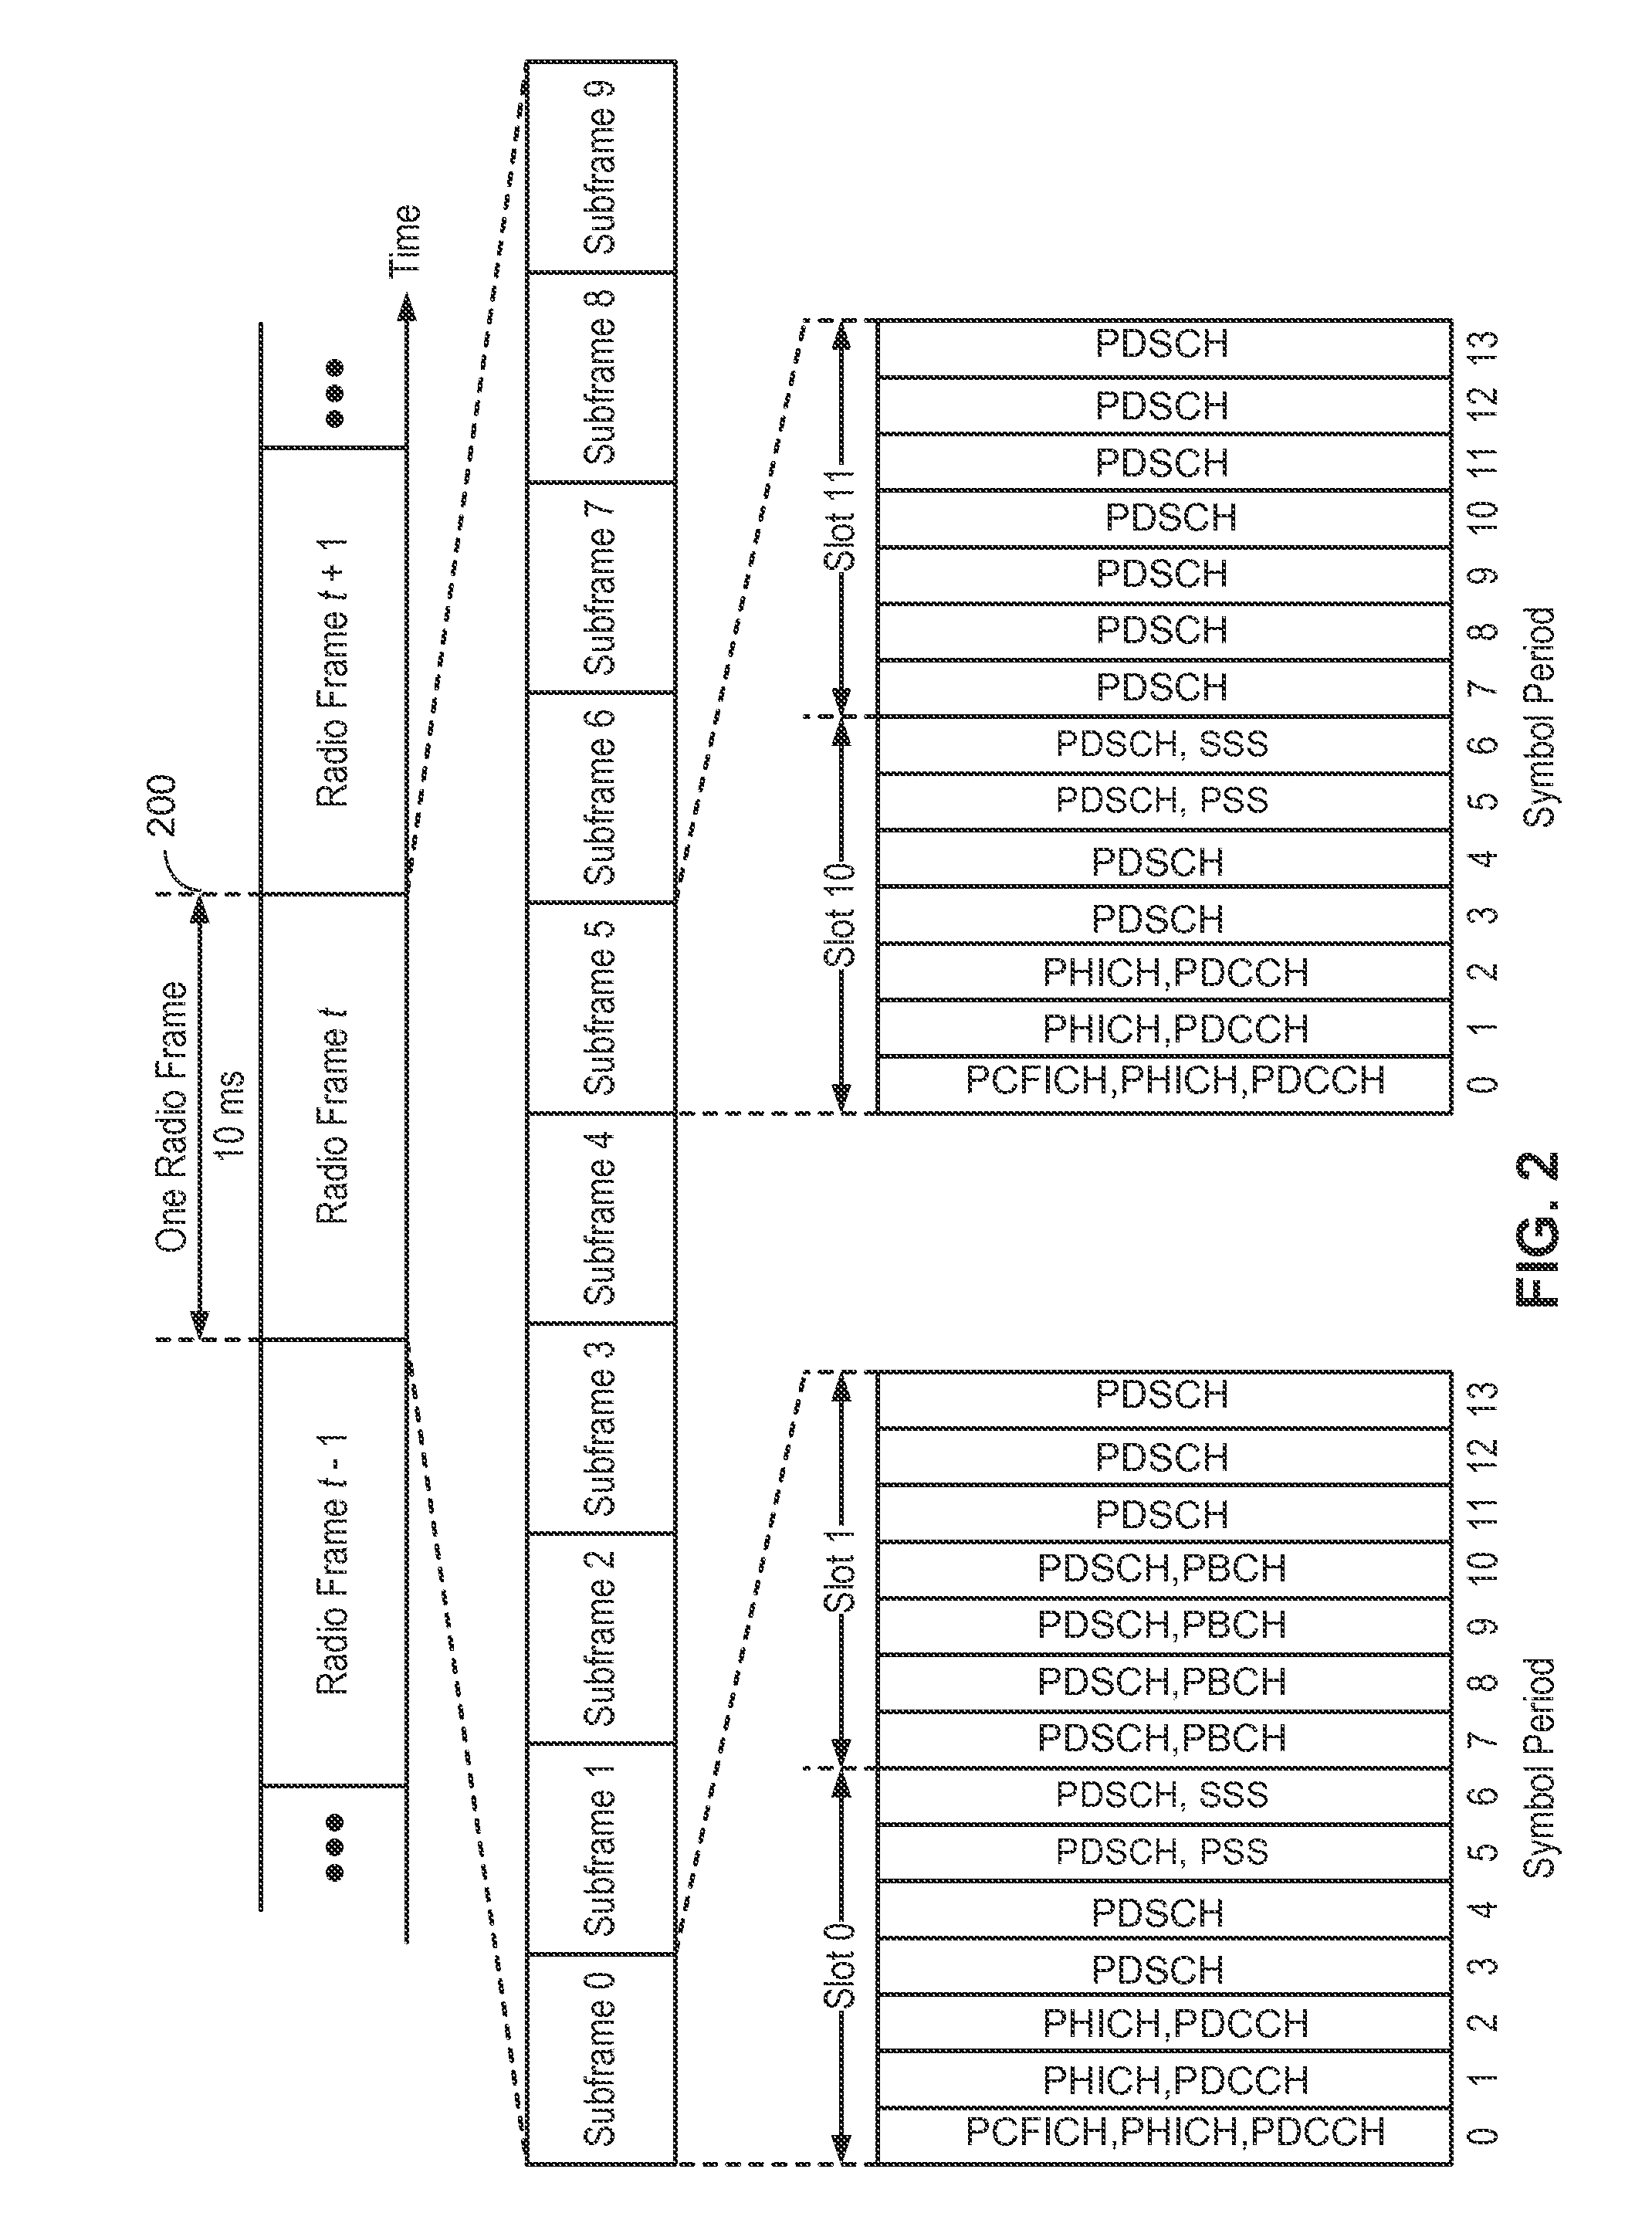 Classification-based adaptive transmission in unlicensed spectrum